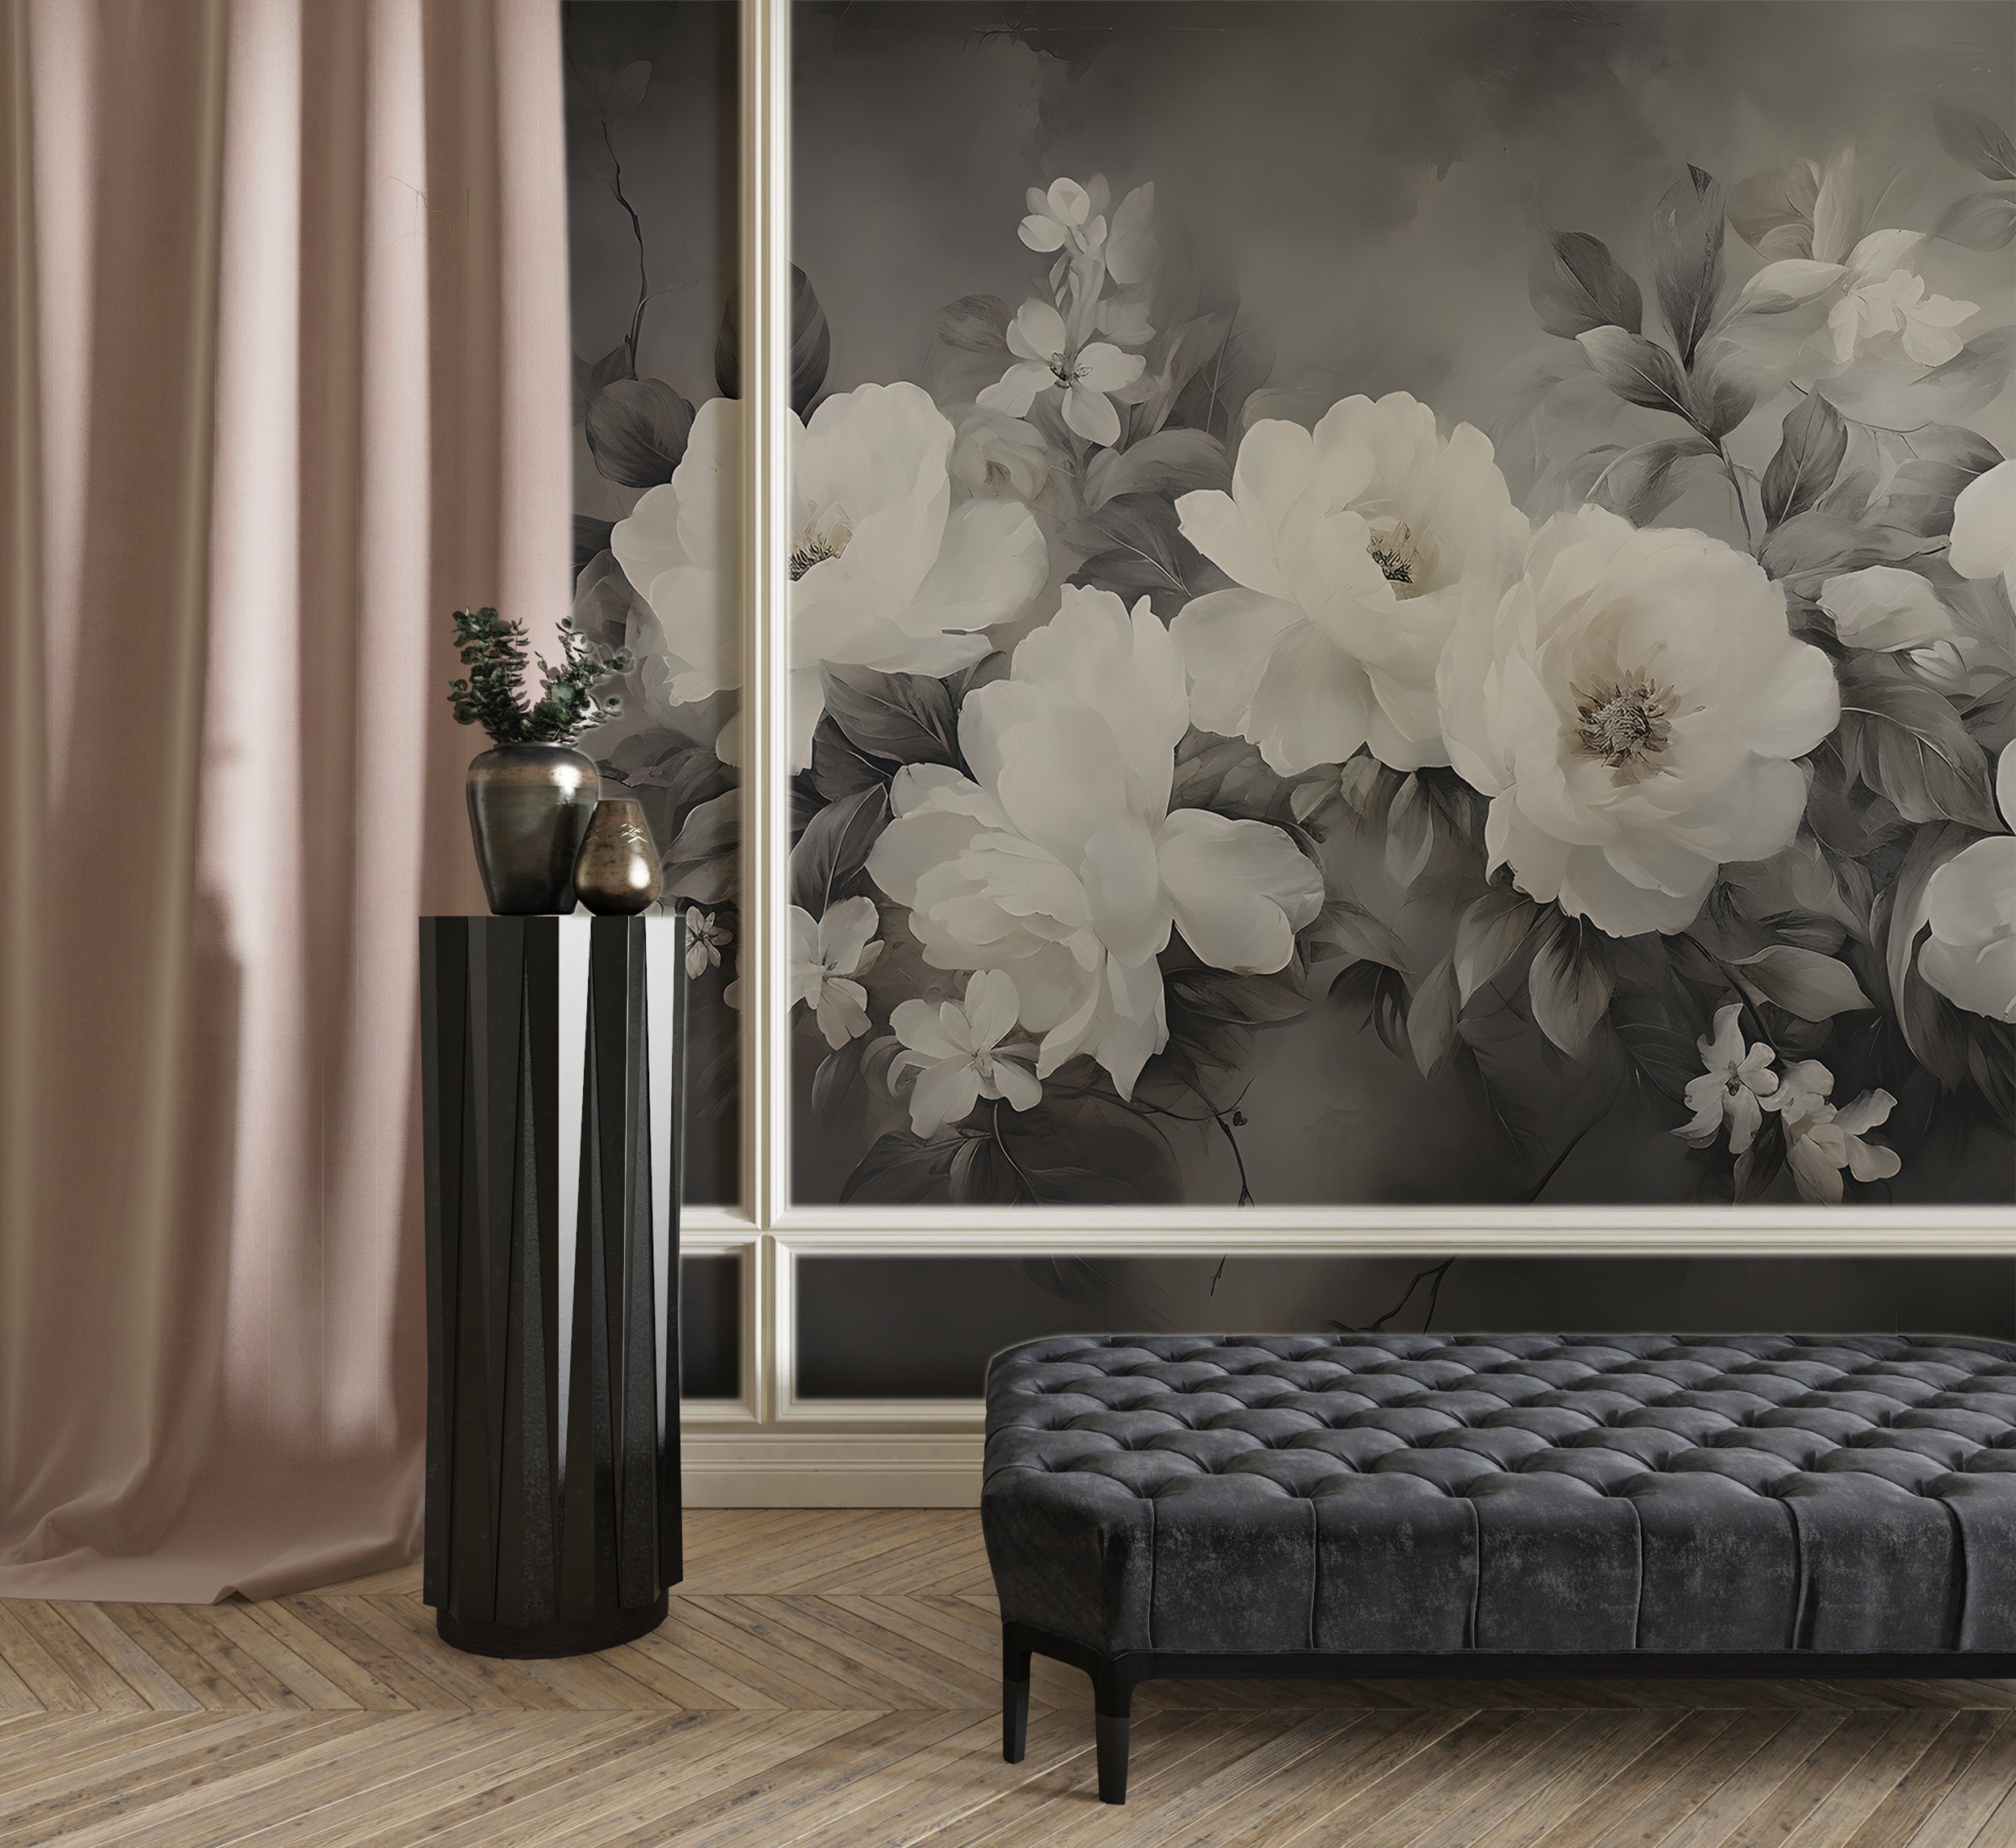 Black and White Floral Decor